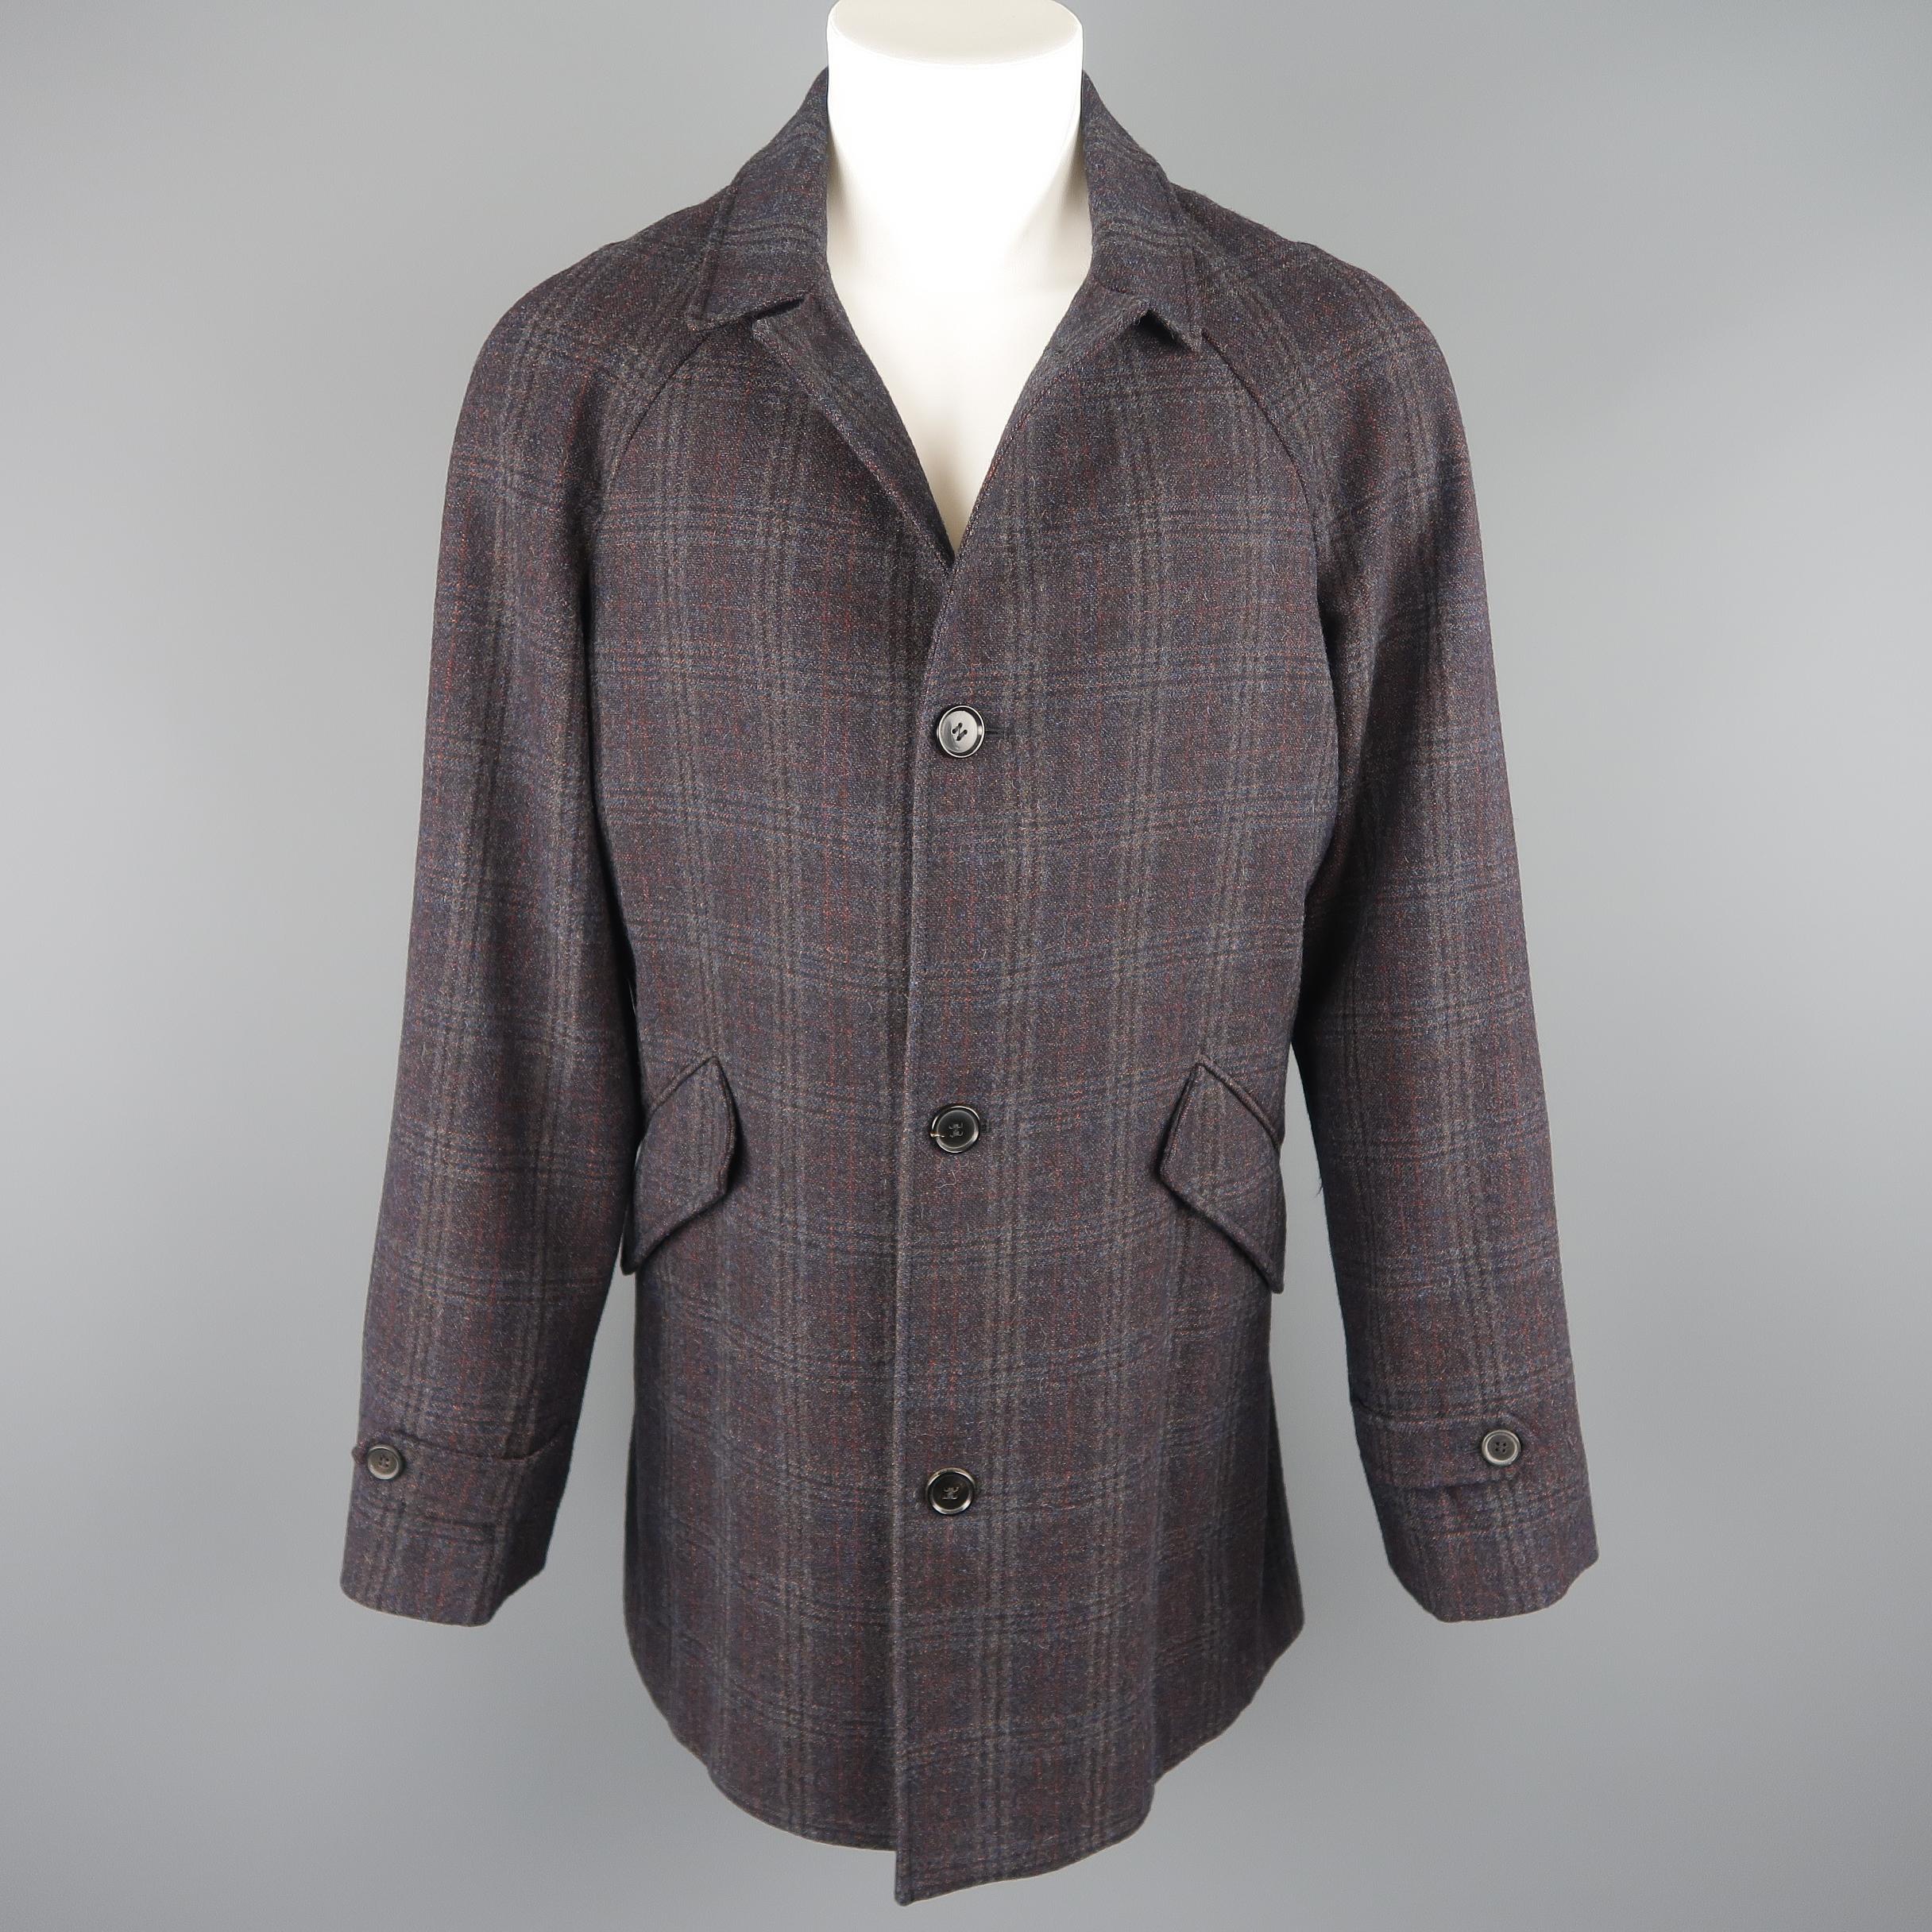 Billy Reid overcoat comes in charcoal plaid wool blend fabric with a pointed collar, button up front, slanted flap pockets, raglan sleeves, and tab cuffs. Made in Italy.
 
Excellent Pre-Owned Condition.
Marked: M
 
Measurements:
 
Shoulder: 17